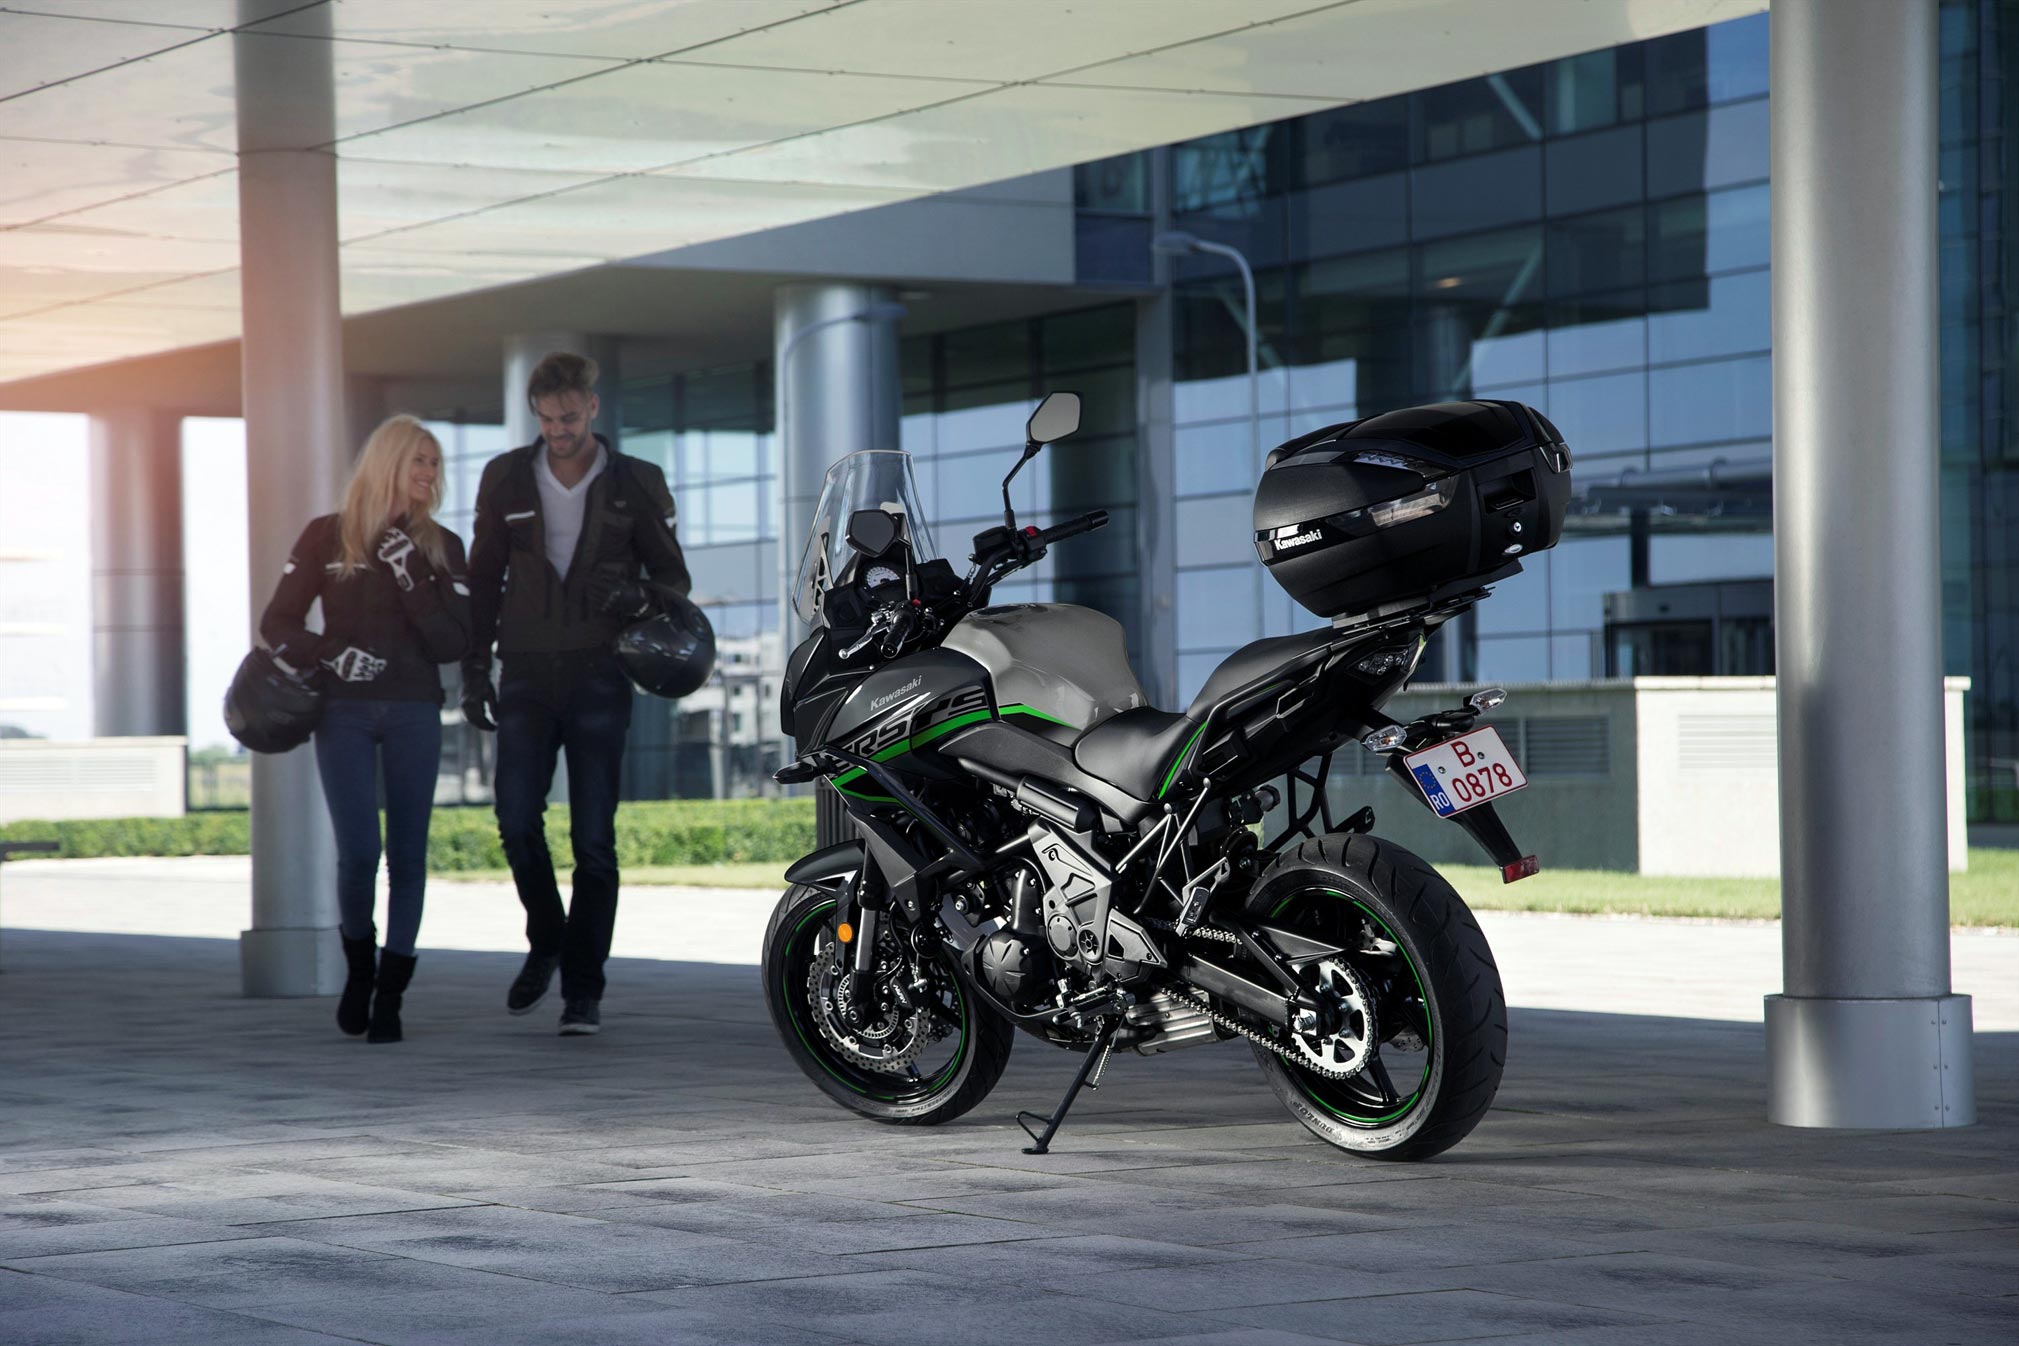 initial Primitiv omvendt 2019 Kawasaki Versys 650 LT ABS Guide • Total Motorcycle